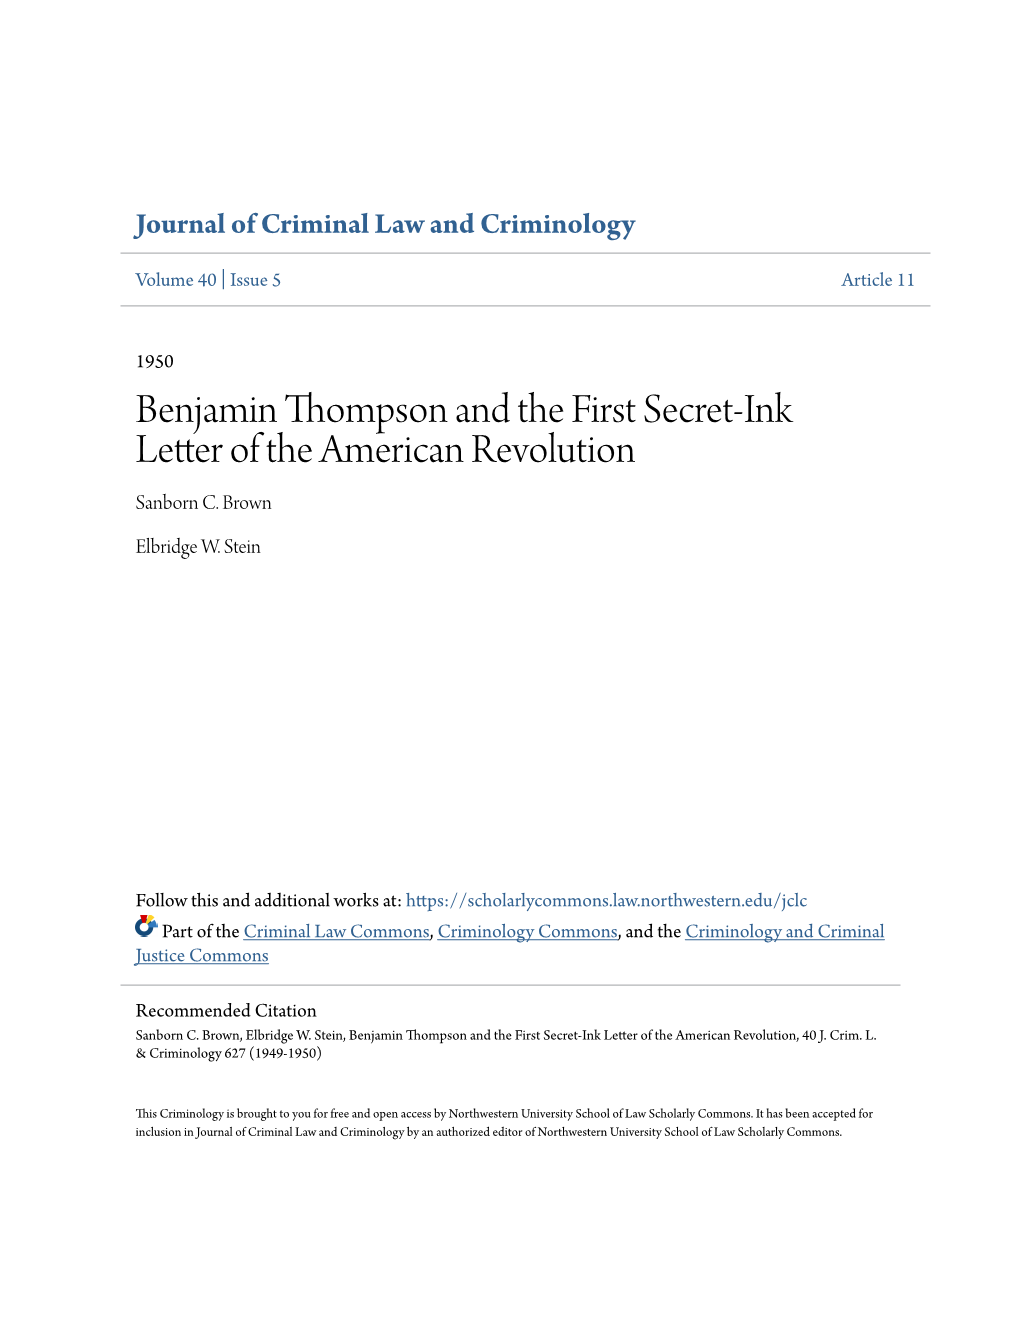 Benjamin Thompson and the First Secret-Ink Letter of the American Revolution Sanborn C